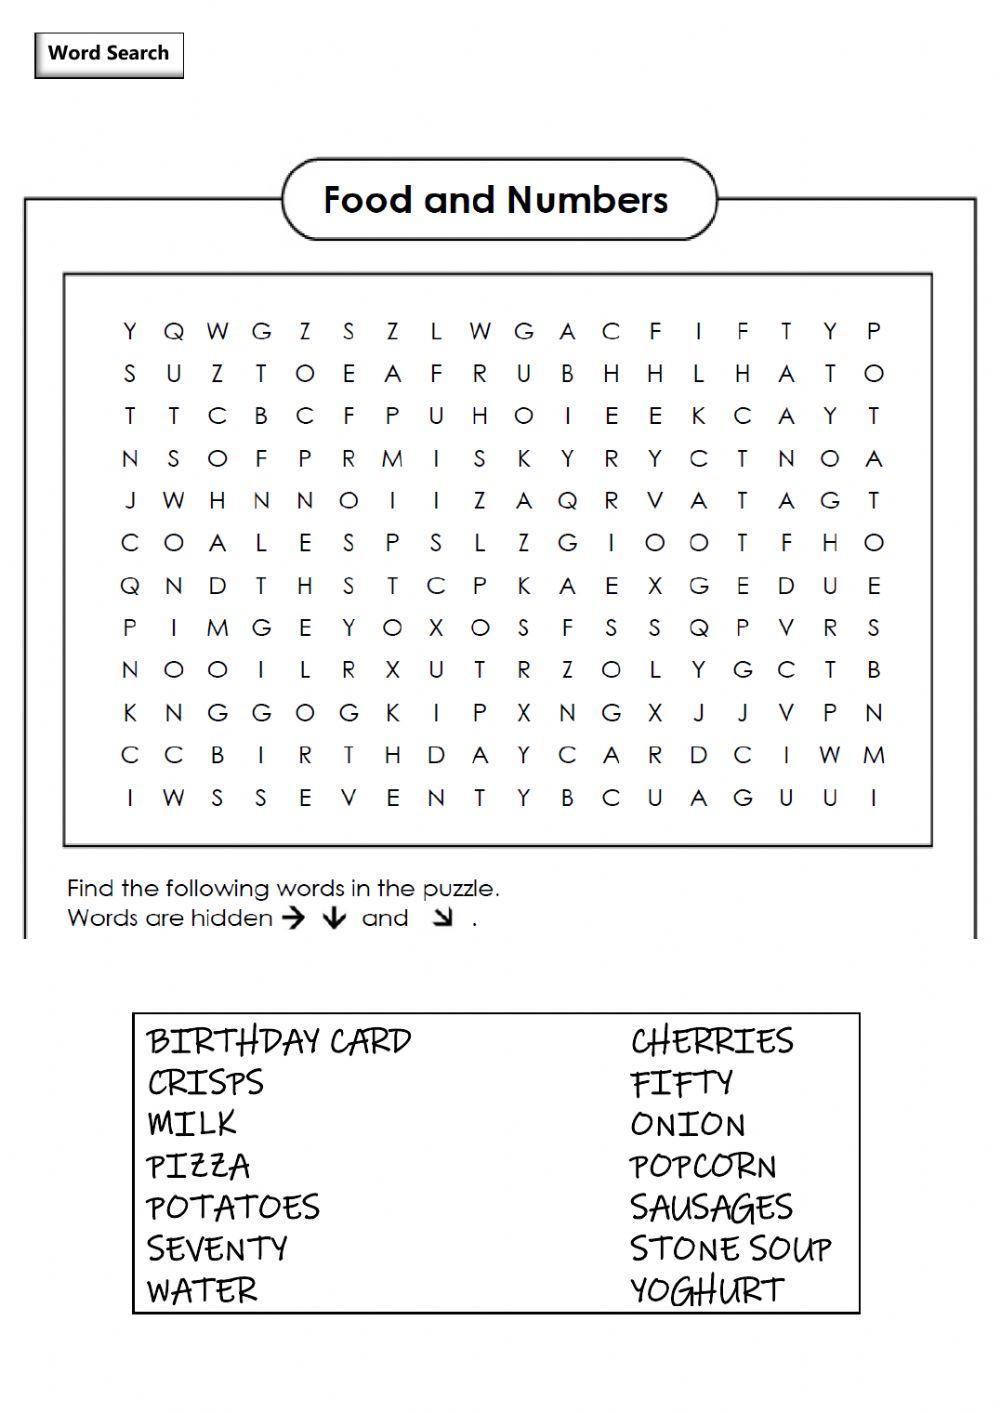 Food and Numbers Word Search